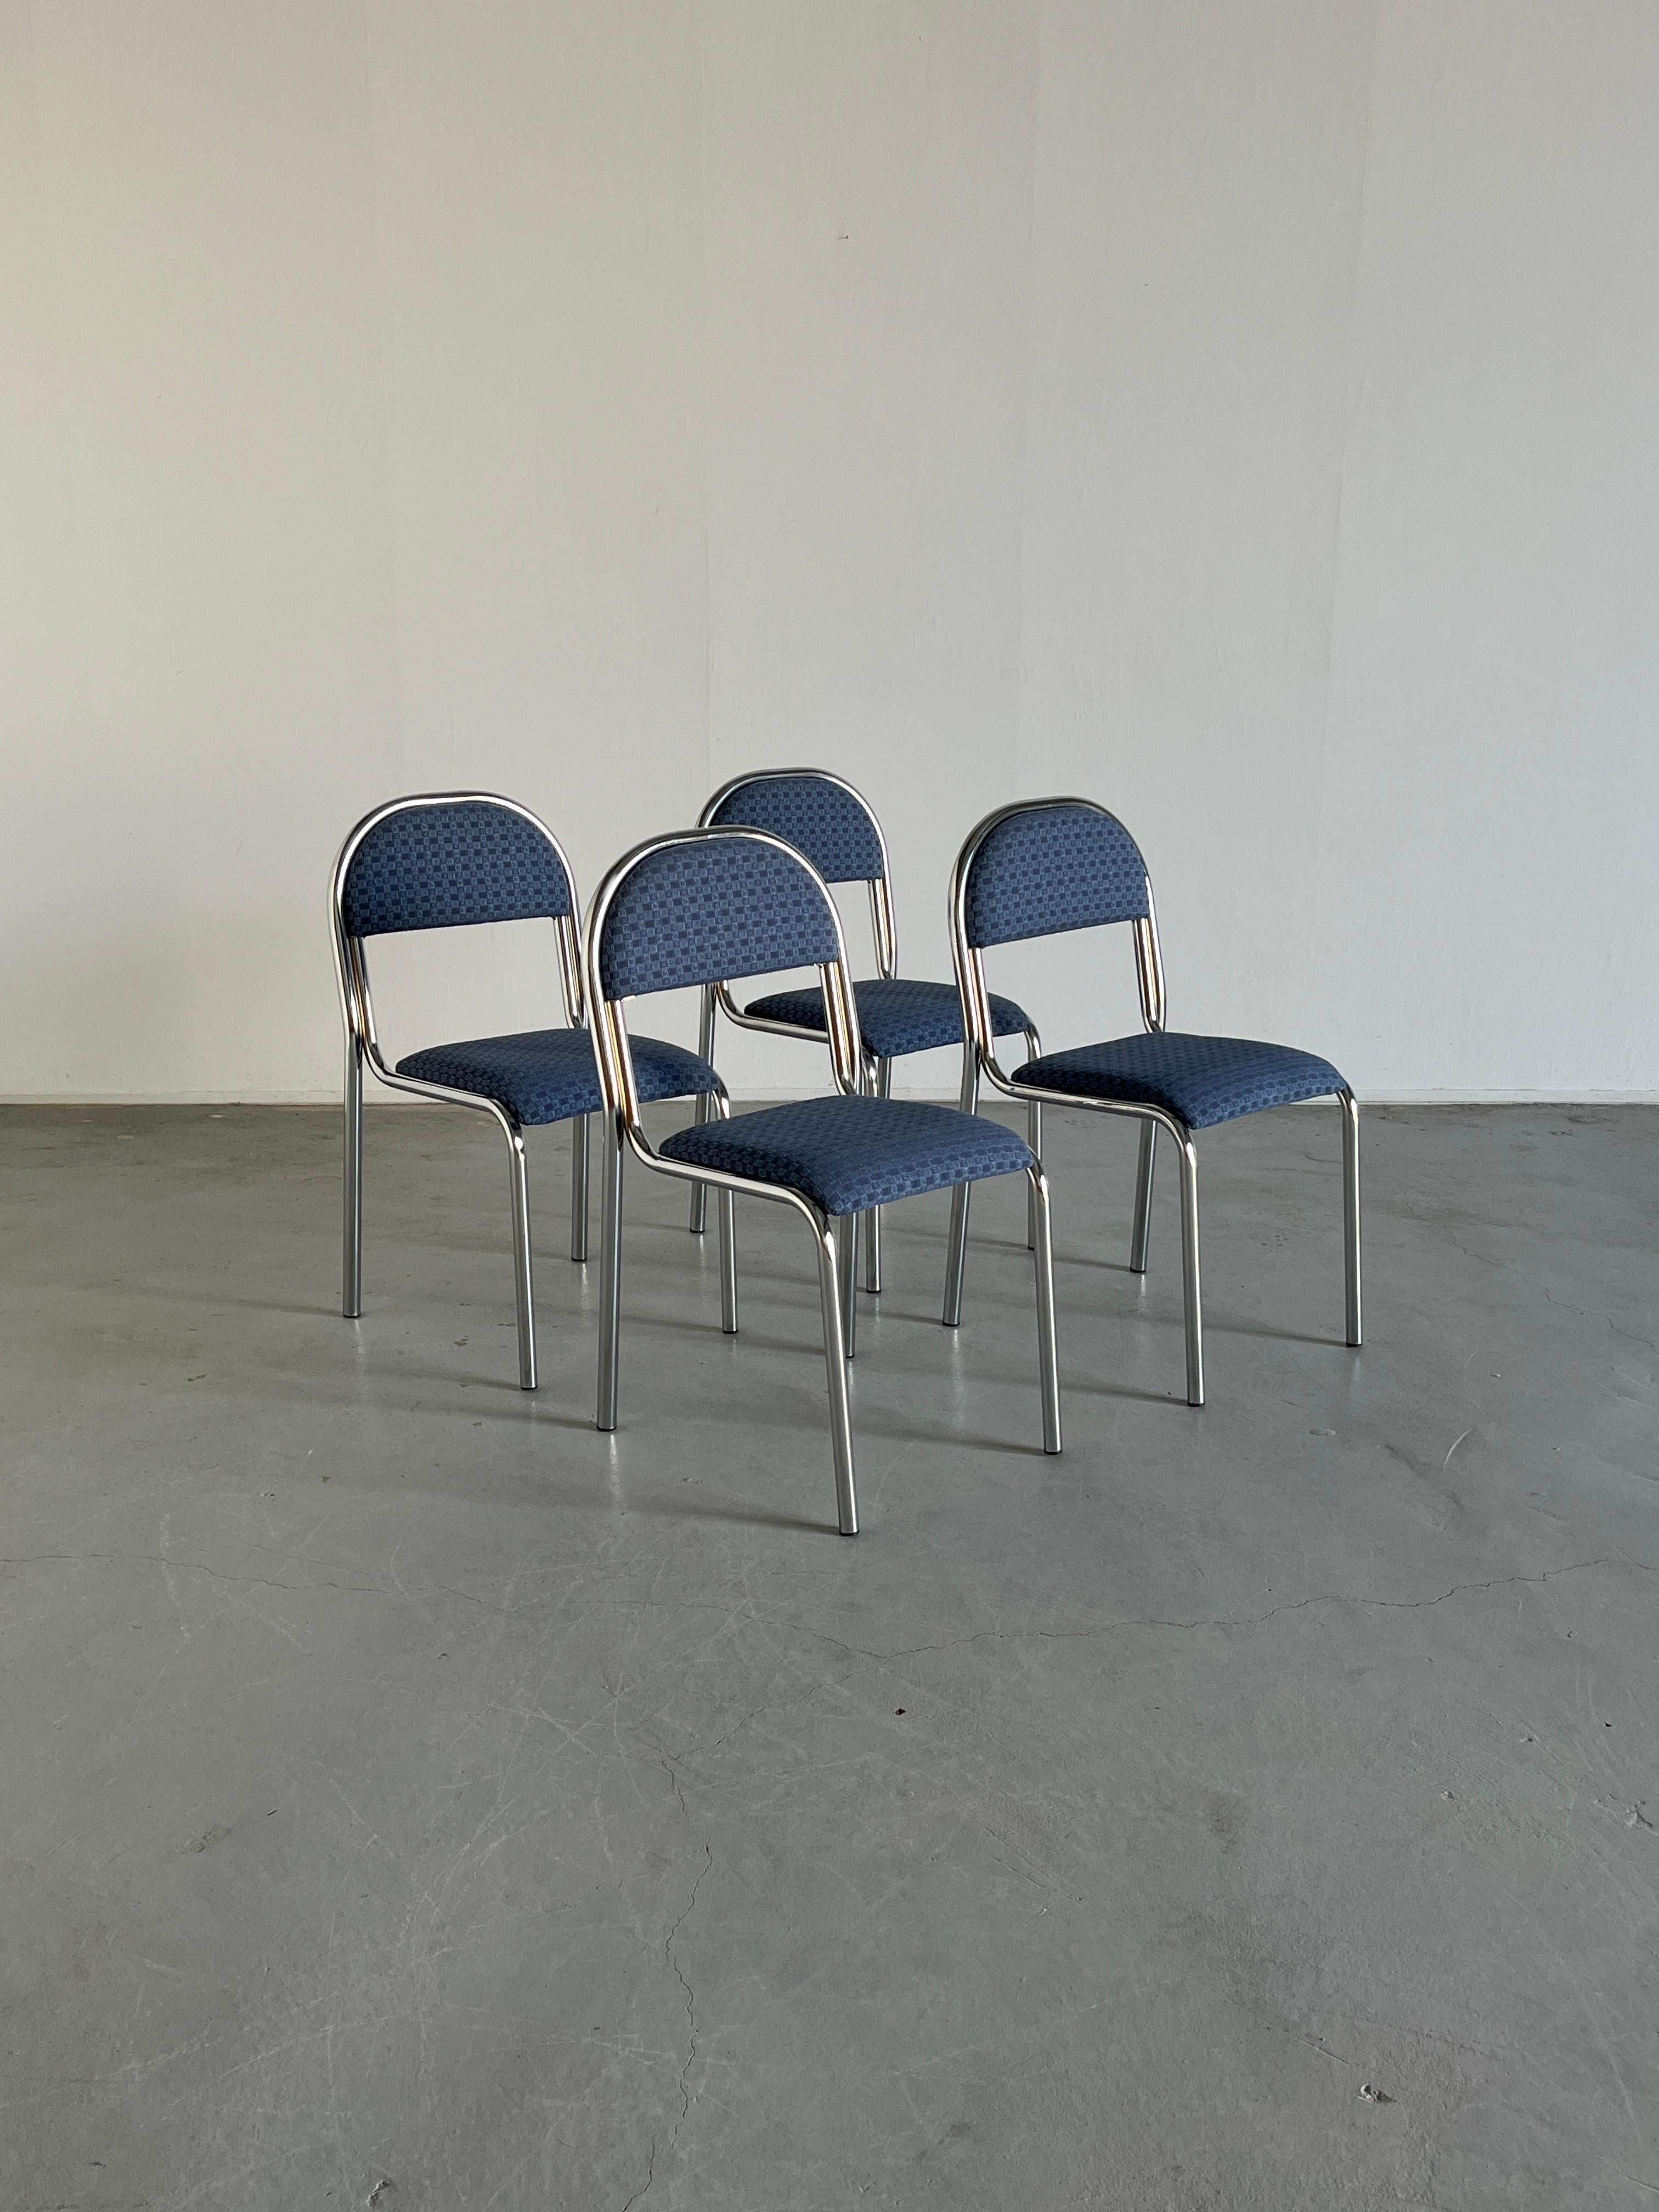 Set of four Italian dining chairs, made from chromed tubular steel frame with a curved structure and upholstered seat and backrest.
Unique design, high quality materials and craftsmanship.
Stackable.

Overall very well preserved and in very good